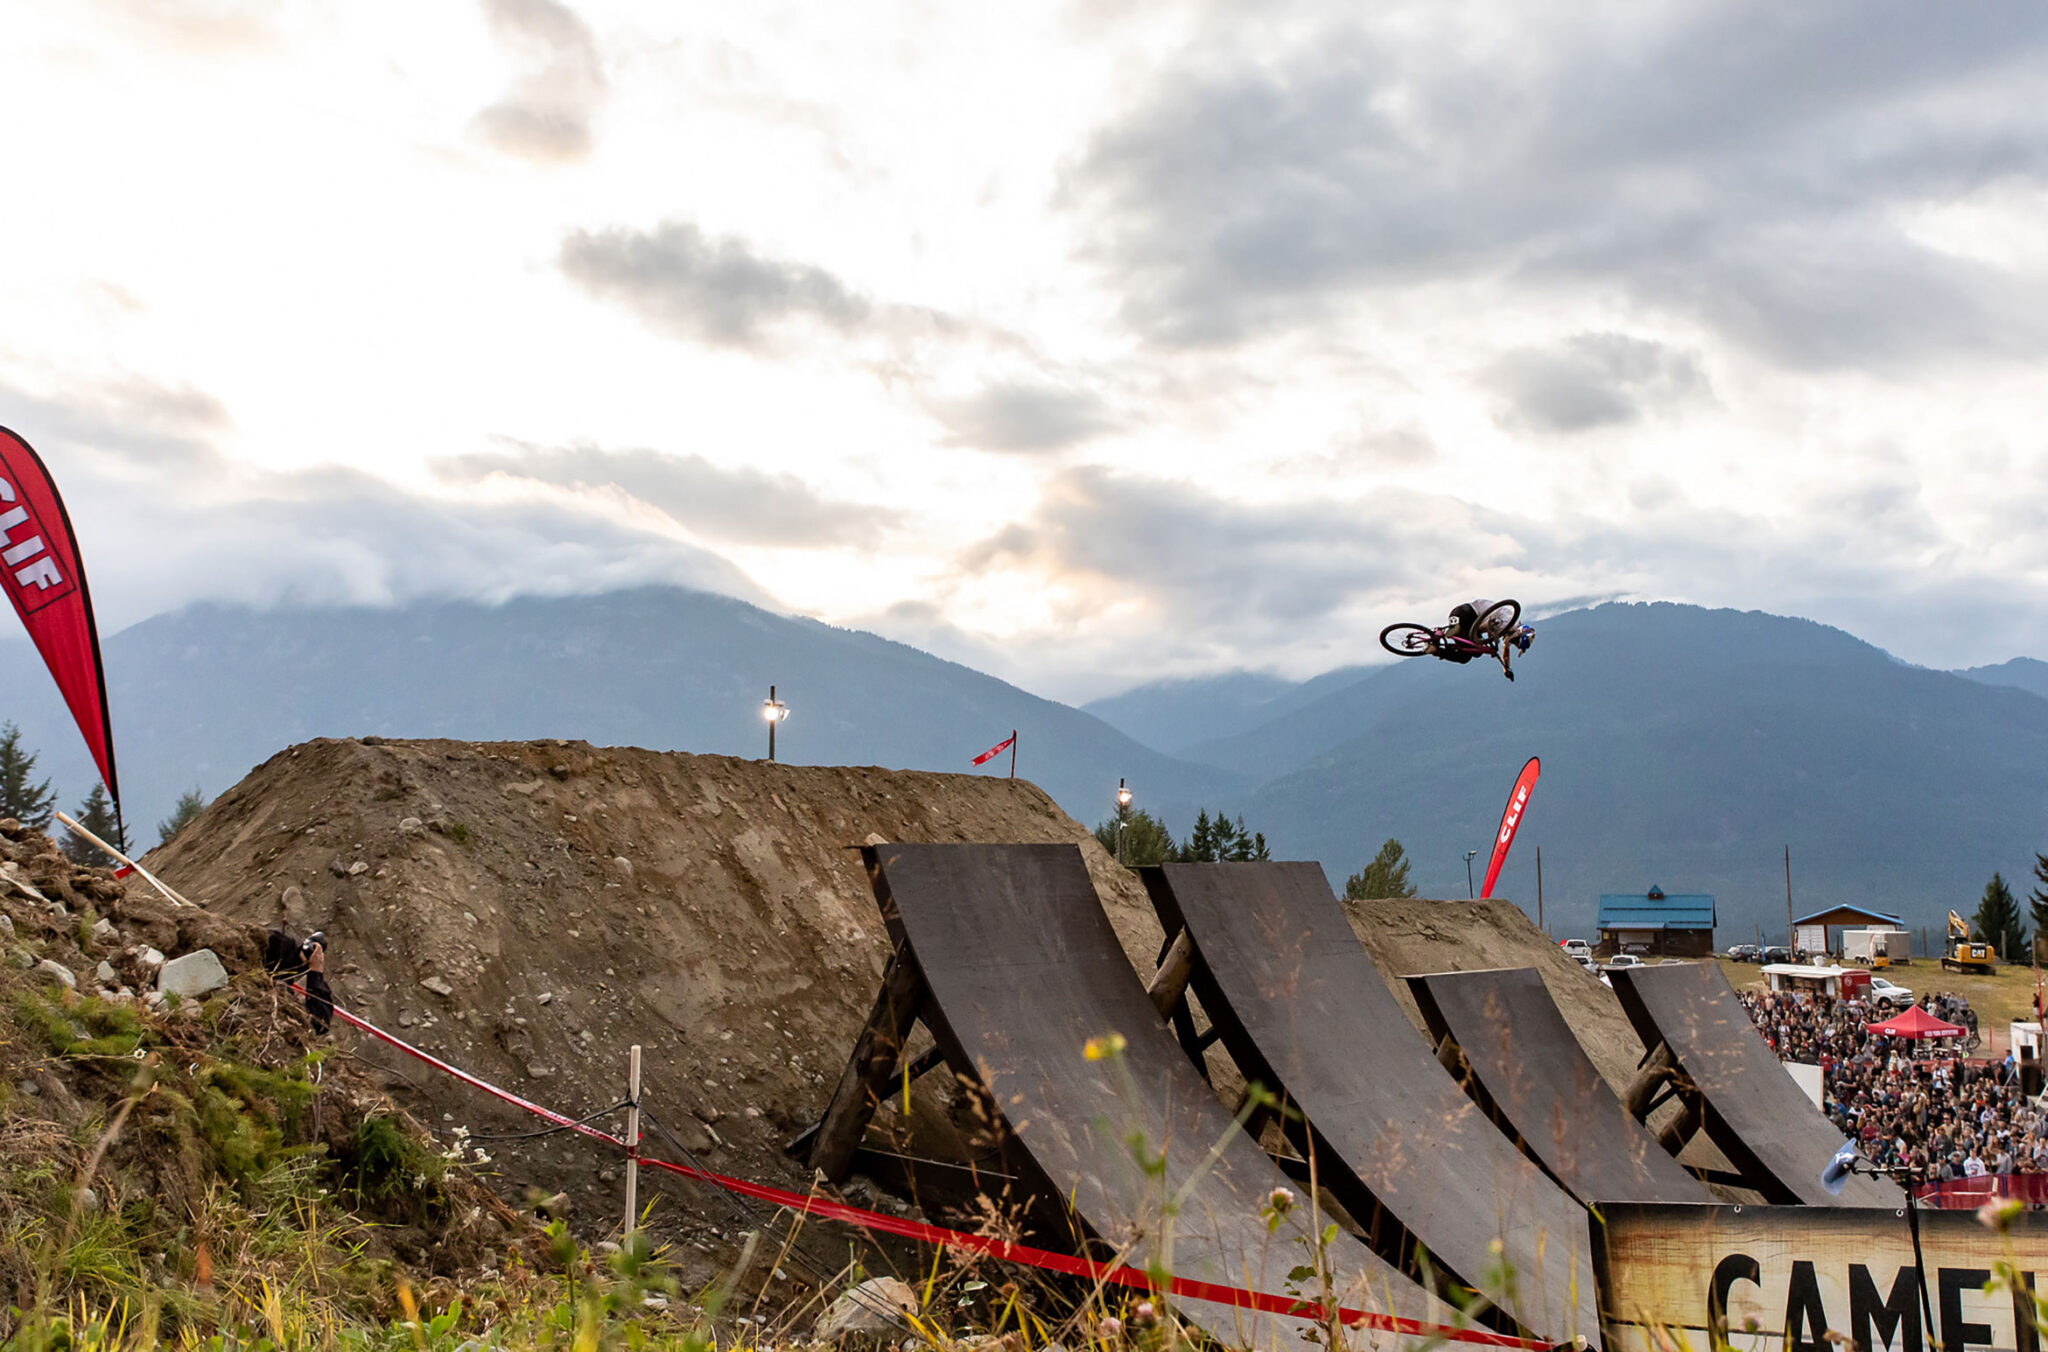 A mountain biker shows their tricks in Speed and Style on Whistler Mountain at the Crankworx festival.